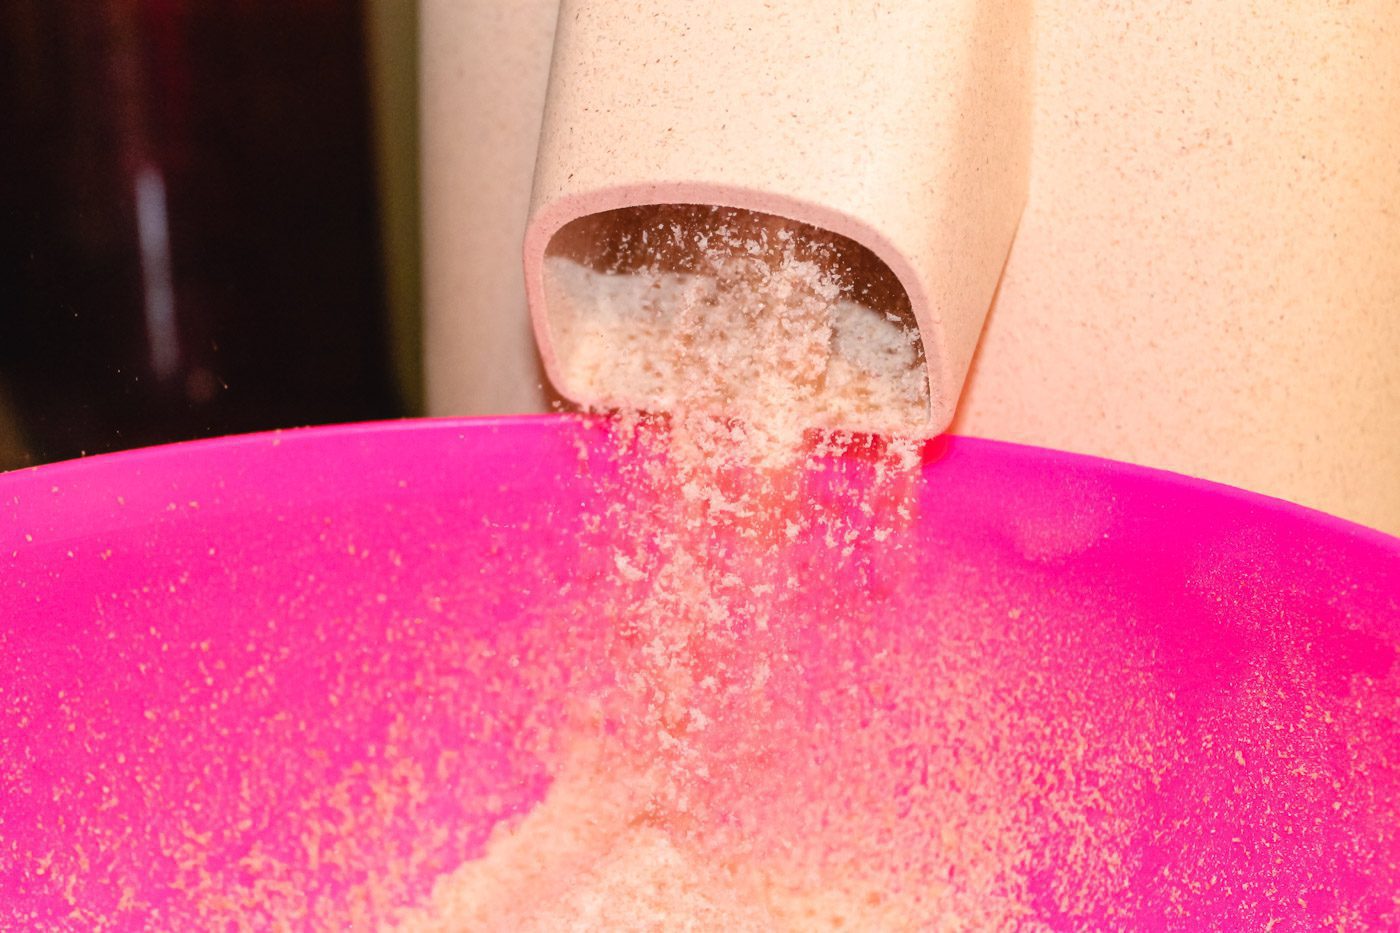 stone grain mill grinding flour into a pink bowl